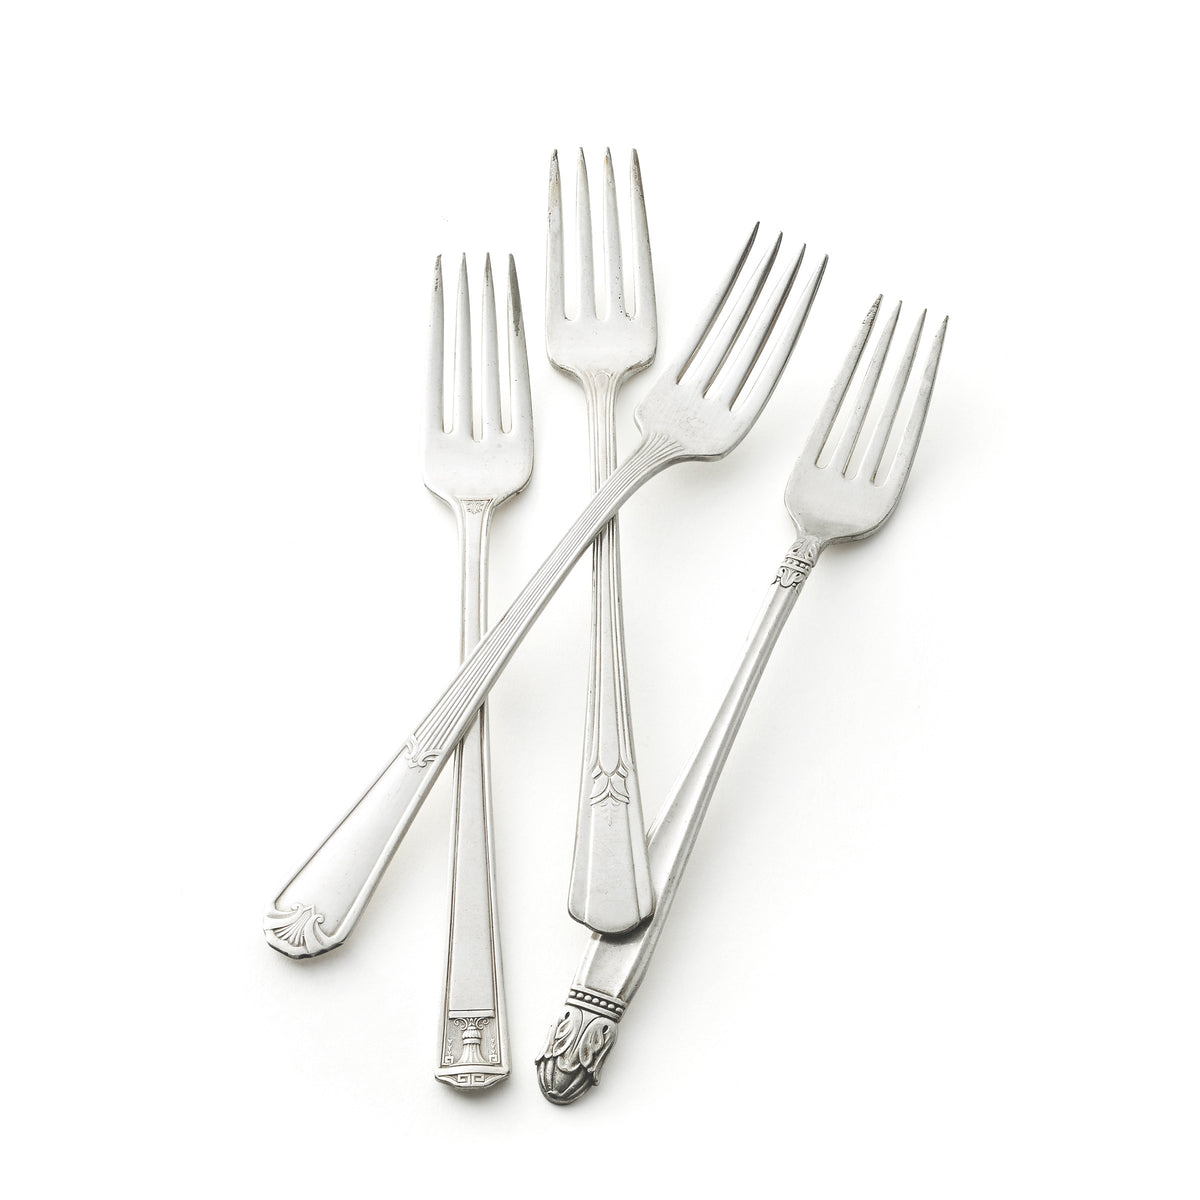 Vintage, silver-plated grille forks collected and restored by Caskata.